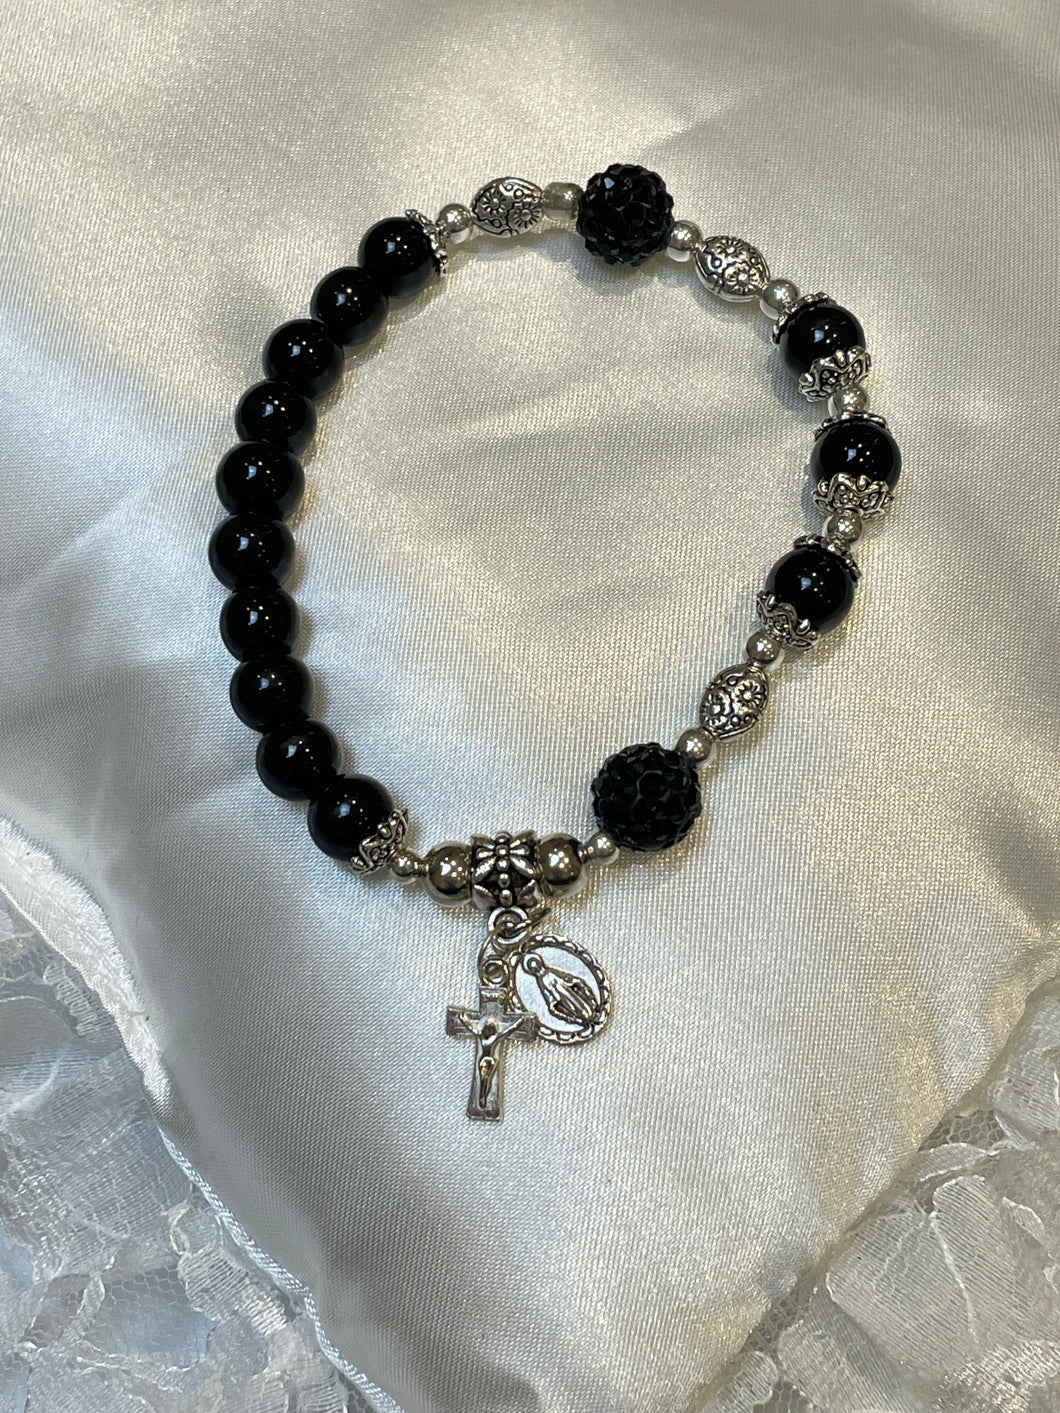 Black Rosary Bracelet with Charms